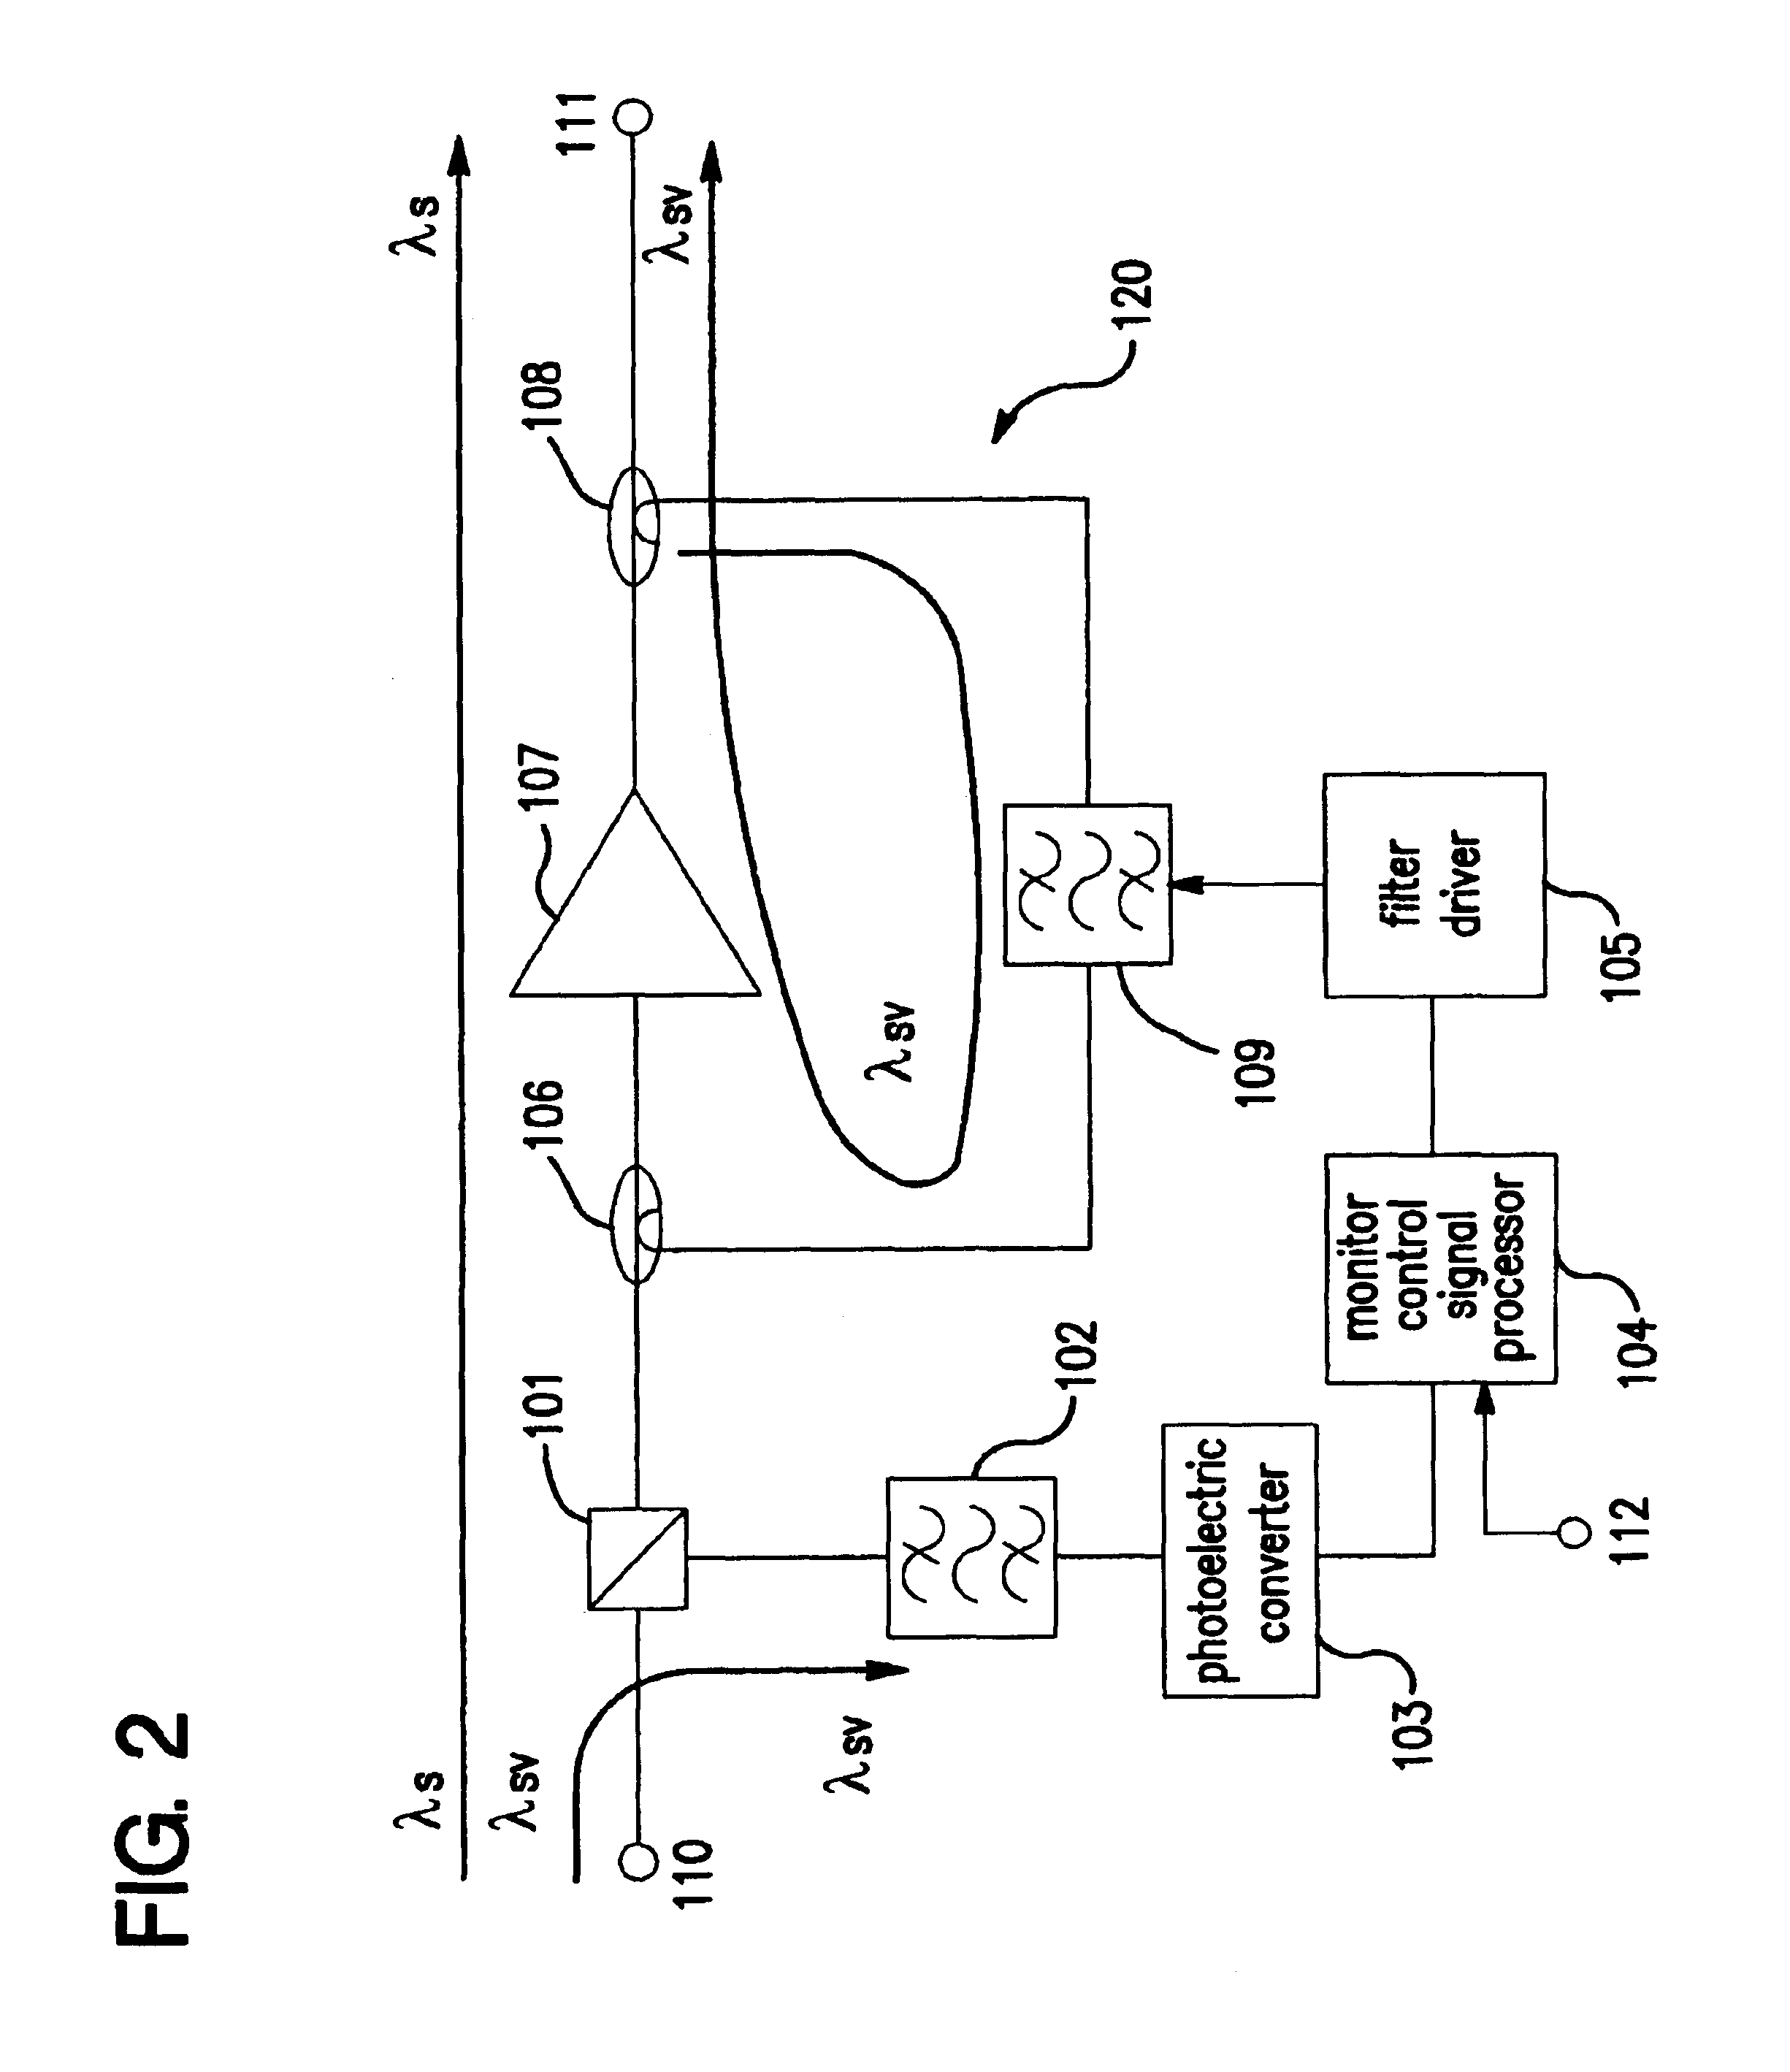 Apparatus for transferring monitor signals in photo-transfer system